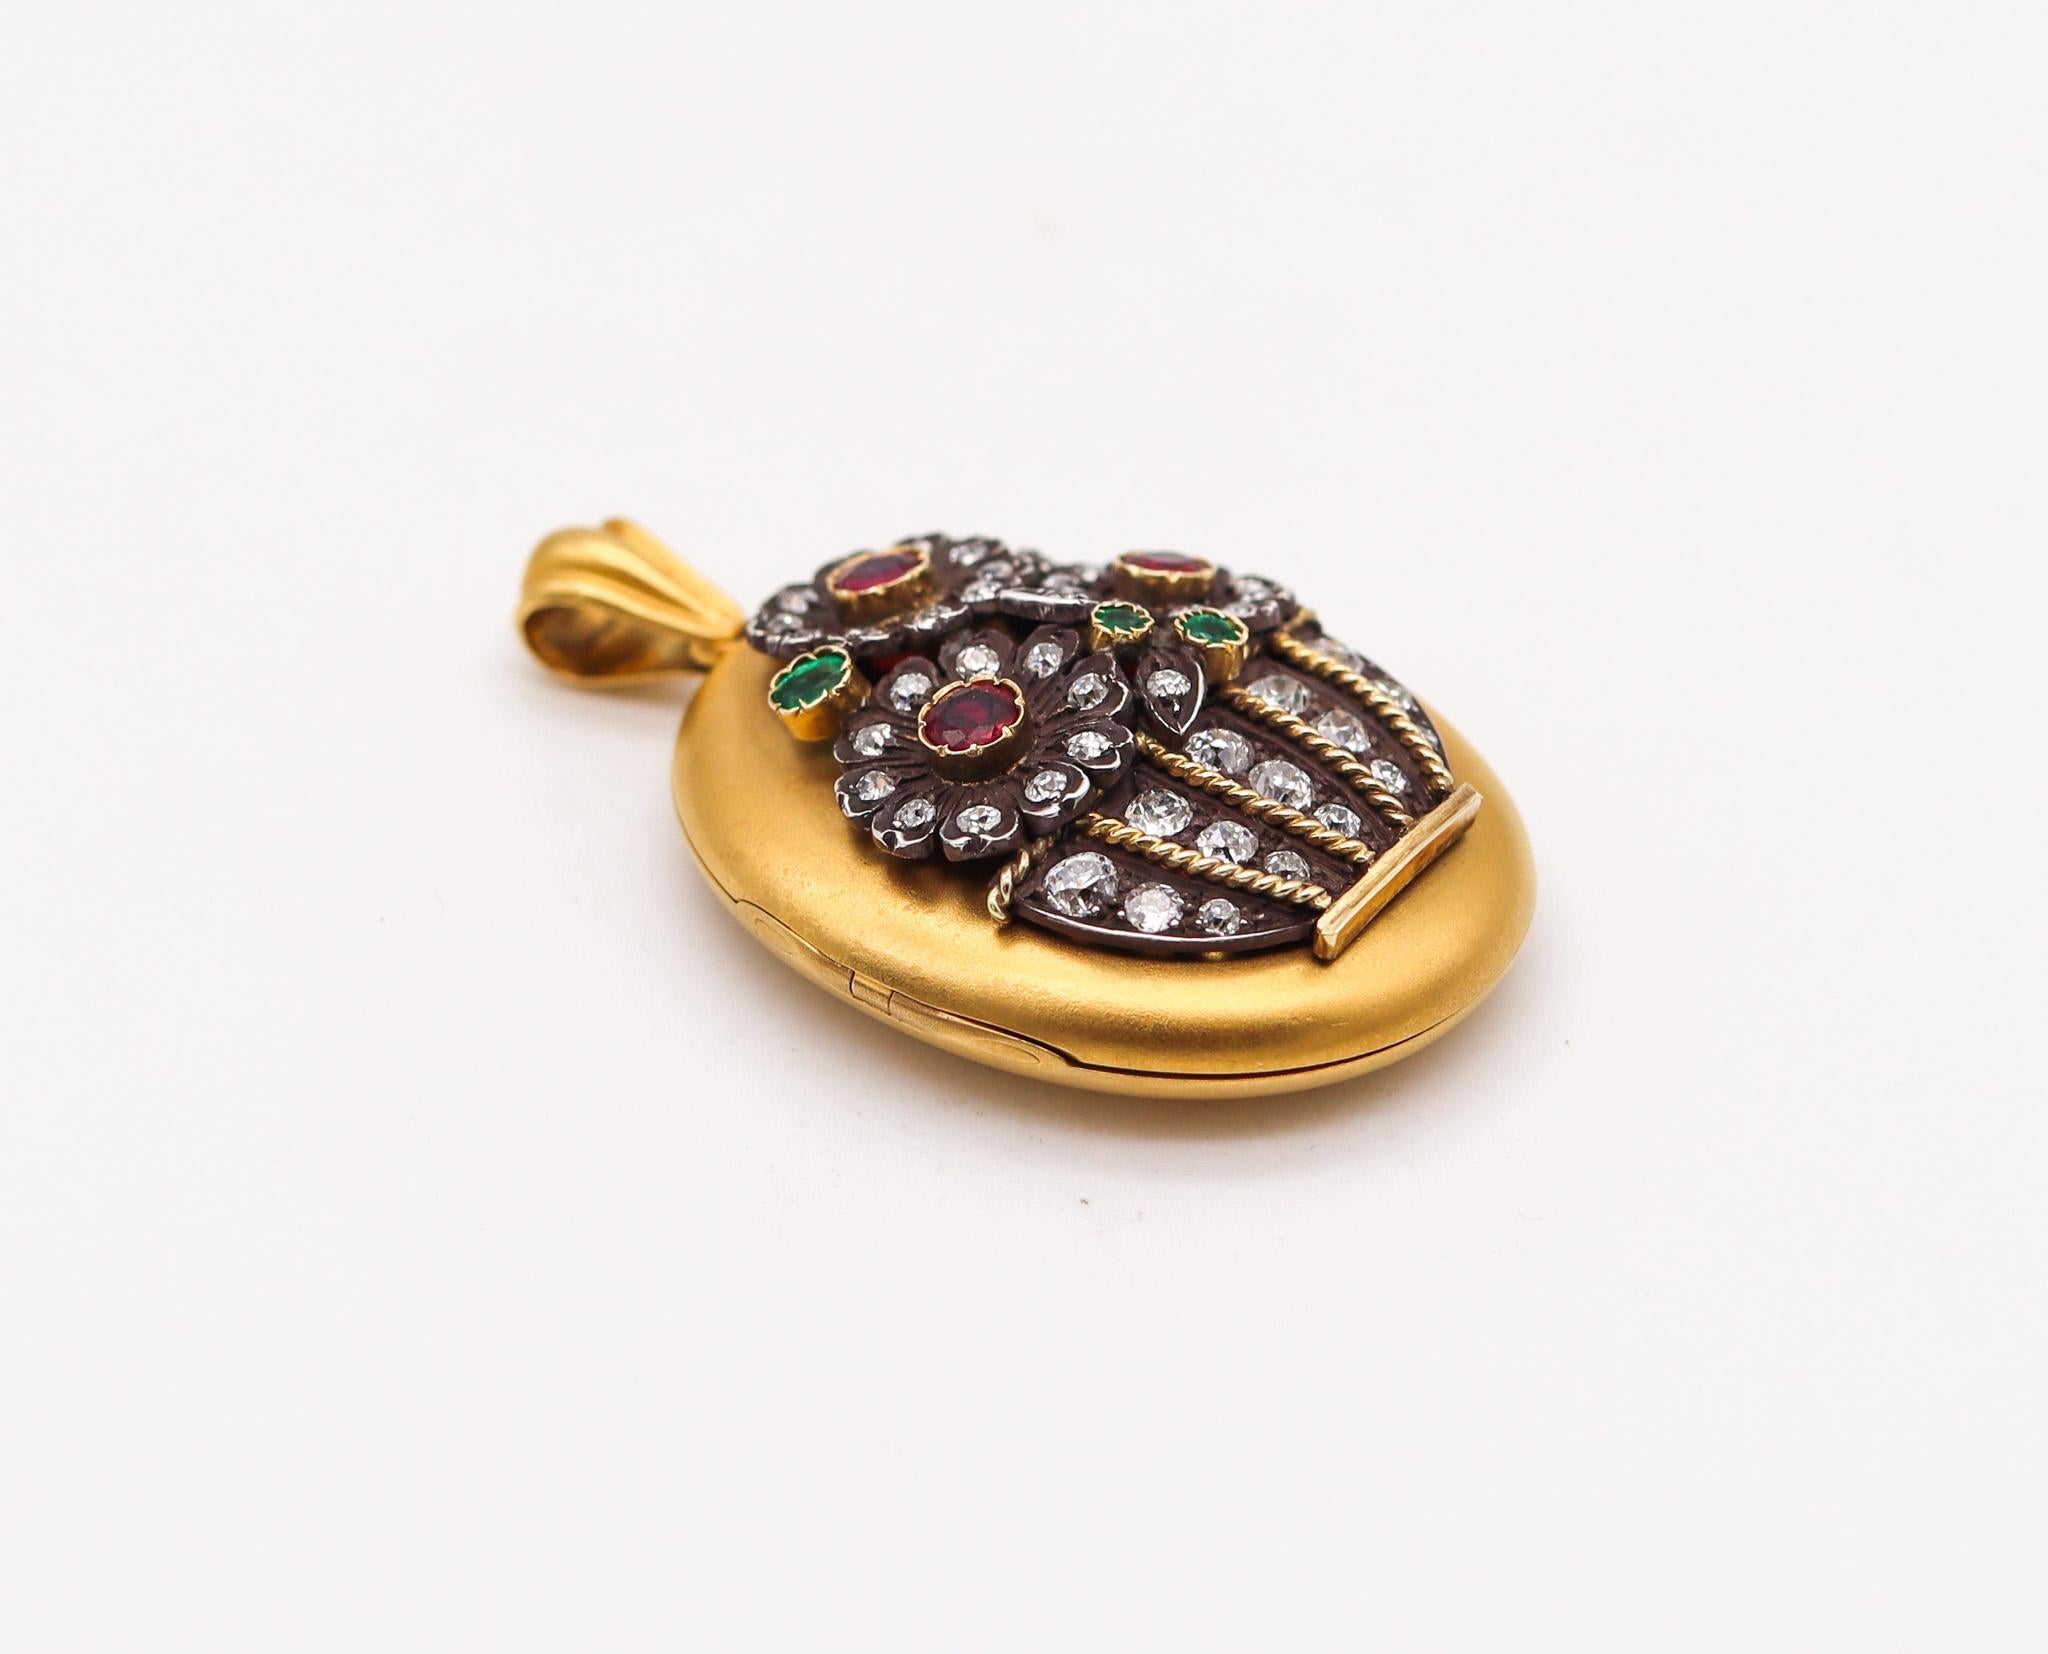 Rose Cut Victorian 1890 Pendant Locket in 18kt Gold with 9.44ctw Diamonds Rubies Emerald For Sale